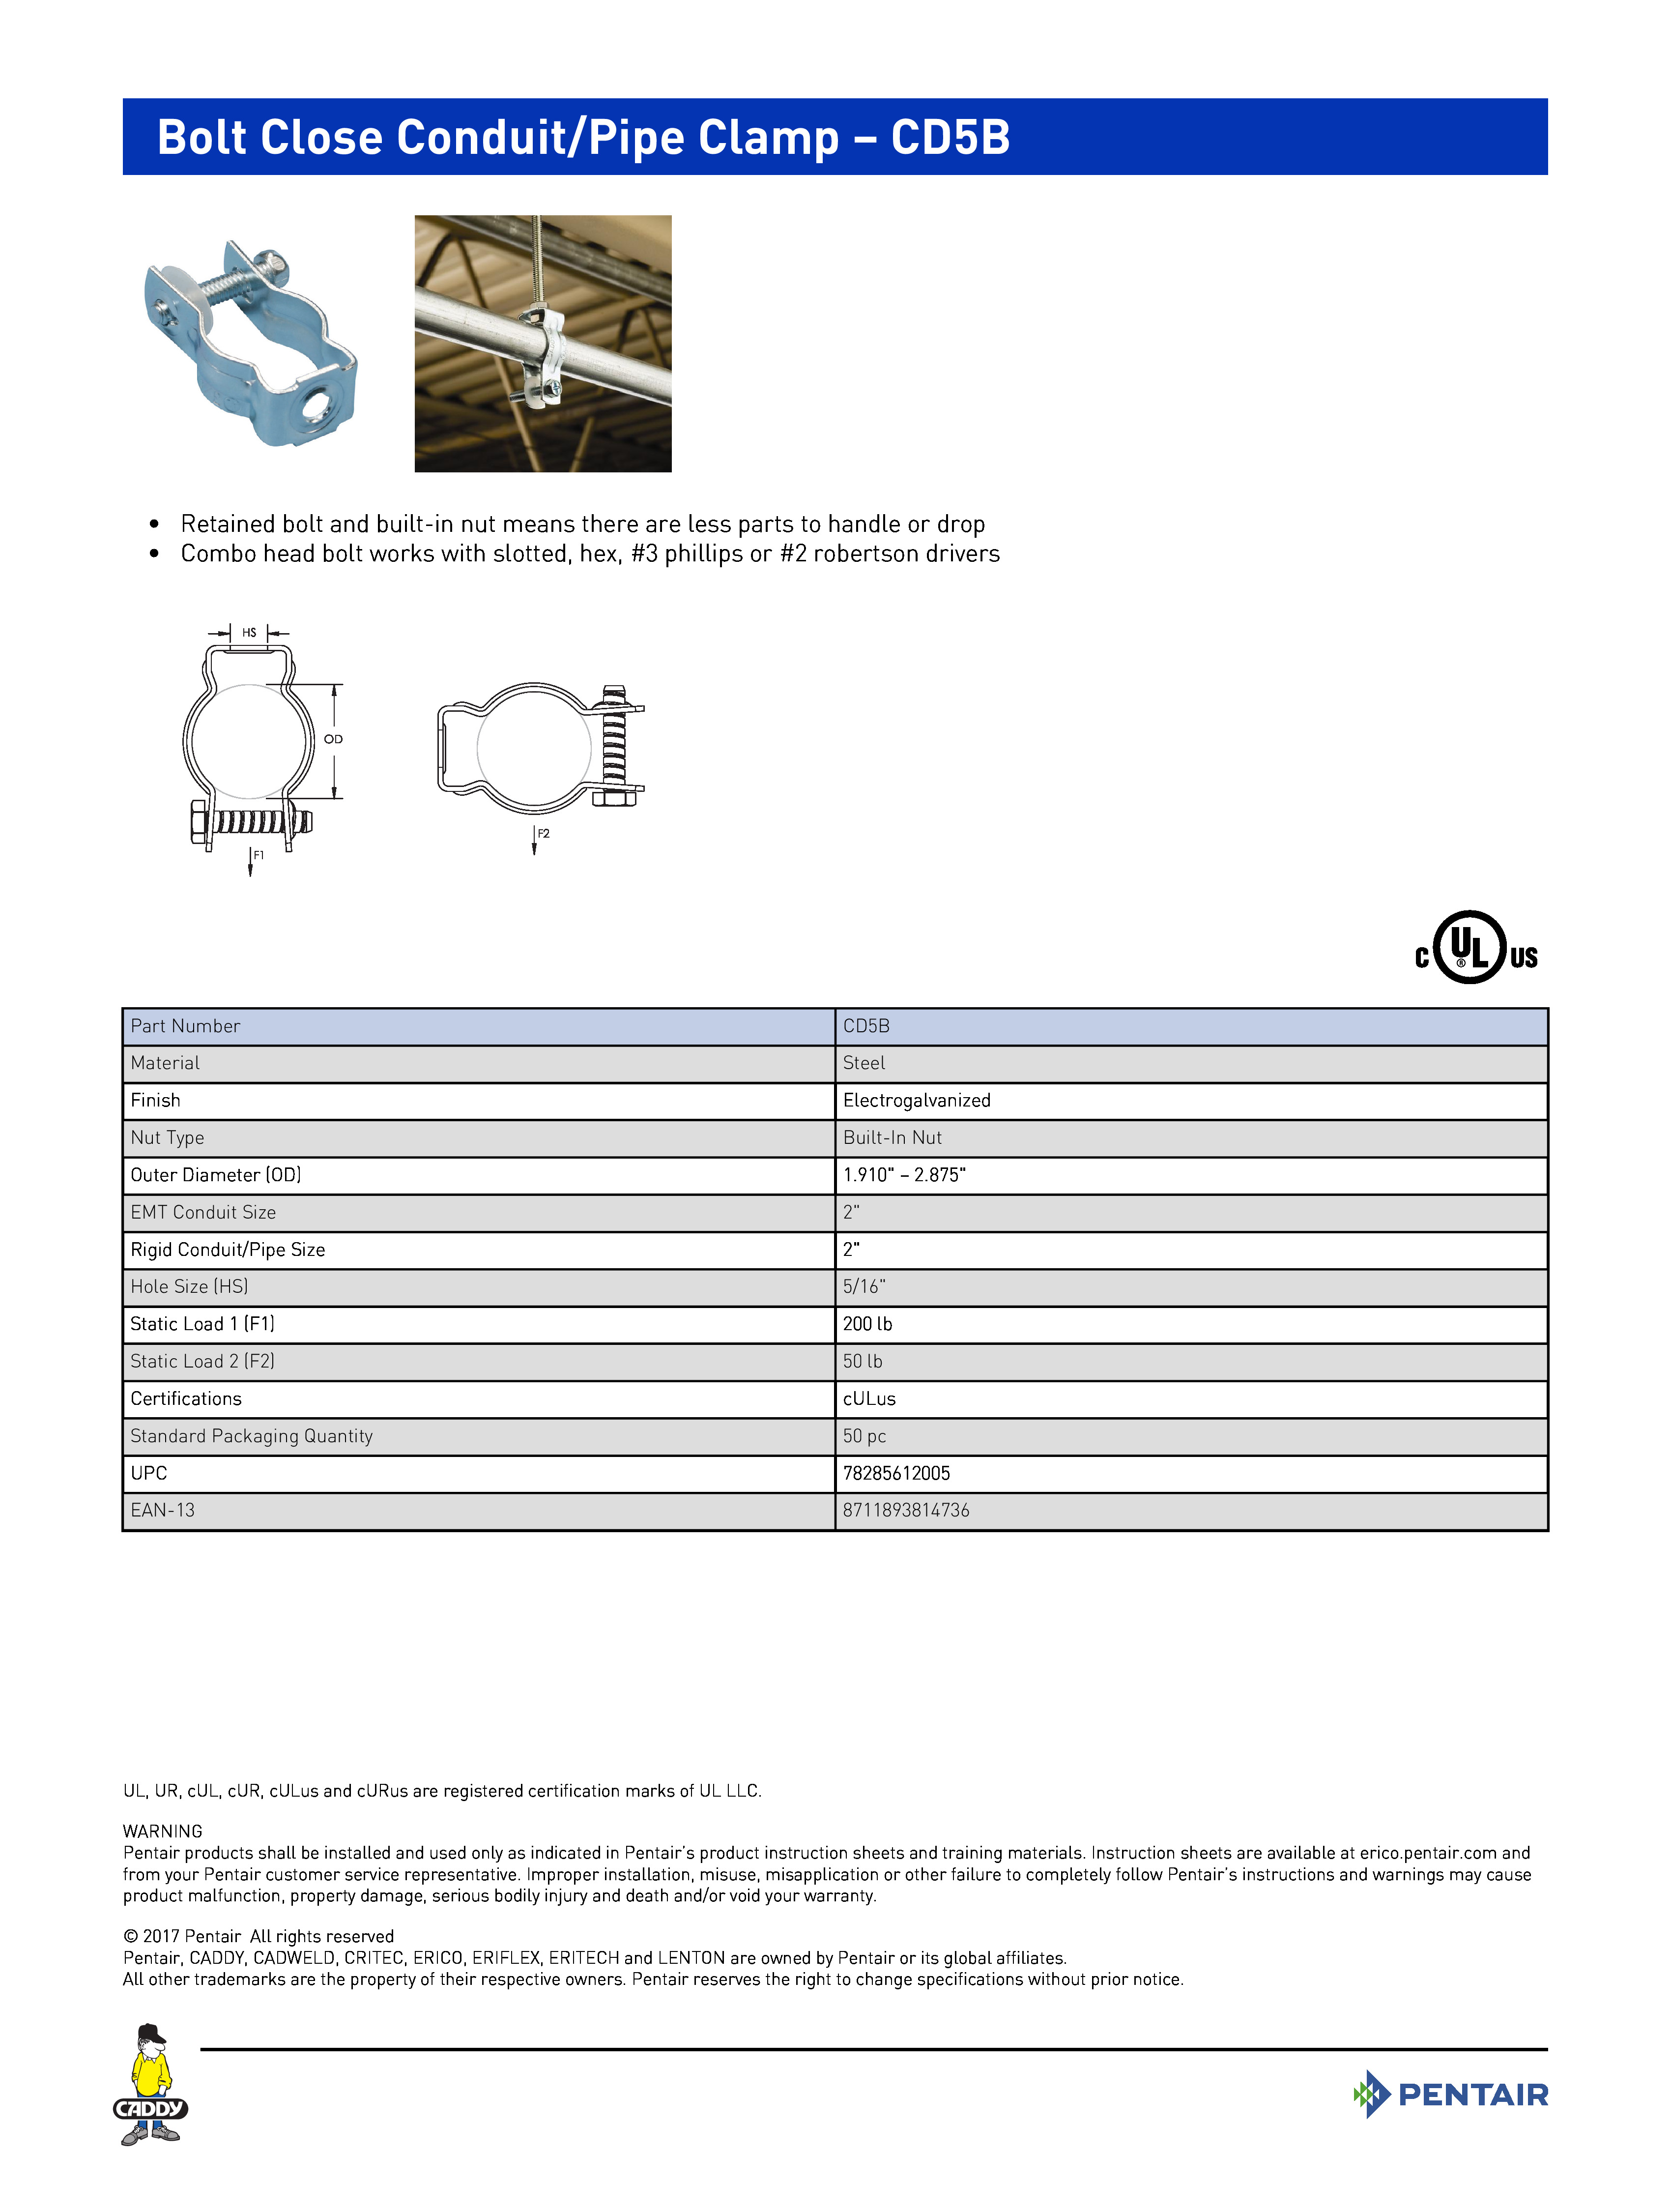 Bolt Close Conduit/Pipe Clamp – CD5B	
 	
•	Retained bolt and built-in nut means there are less parts to handle or drop	
•	Combo head bolt works with slotted, hex, #3 phillips or #2 robertson drivers	
 	
Part NumberCD5BMaterialSteelFinishElectrogalvanizedNut TypeBuilt-In NutOuter Diameter (OD)1.910" – 2.875"EMT Conduit Size2"Rigid Conduit/Pipe Size2"Hole Size (HS)5/16"Static Load 1 (F1)200 lbStatic Load 2 (F2)50 lbCertificationscULusStandard Packaging Quantity50 pcUPC78285612005EAN-138711893814736
UL, UR, cUL, cUR, cULus and cURus are registered certification marks of UL LLC. WARNINGPentair products shall be installed and used only as indicated in Pentair’s product instruction sheets and training materials. Instruction sheets are available at erico.pentair.com andfrom your Pentair customer service representative. Improper installation, misuse, misapplication or other failure to completely follow Pentair’s instructions and warnings may causeproduct malfunction, property damage, serious bodily injury and death and/or void your warranty. 